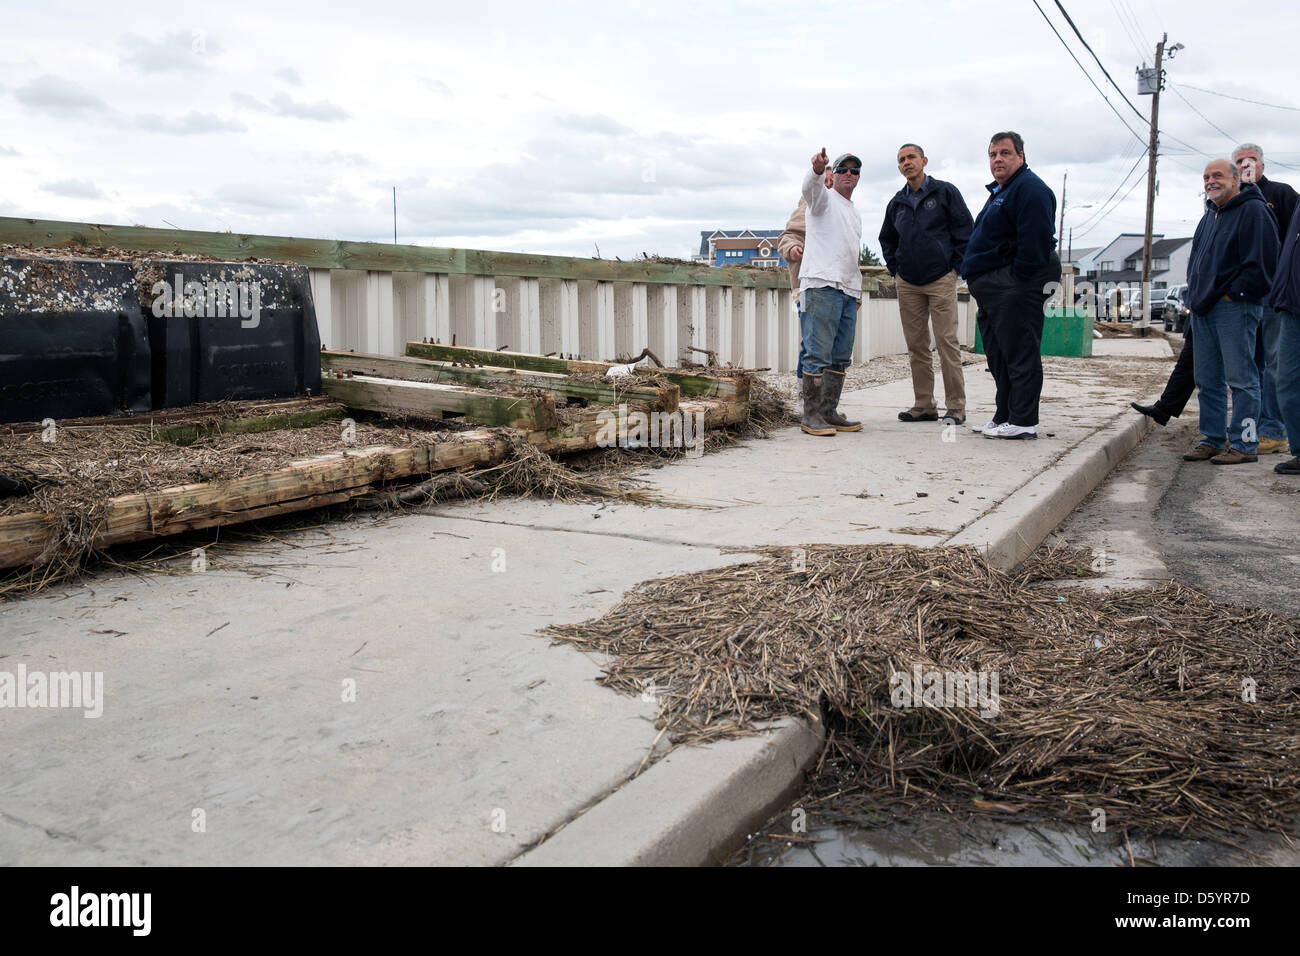 United States President Barack Obama and New Jersey Governor Chris Christie talk with citizens who are recovering from Hurricane Sandy, while surveying storm damage in Brigantine, New Jersey, Wednesday, October 31, 2012. .Mandatory Credit: Pete Souza - White House via CNP Stock Photo